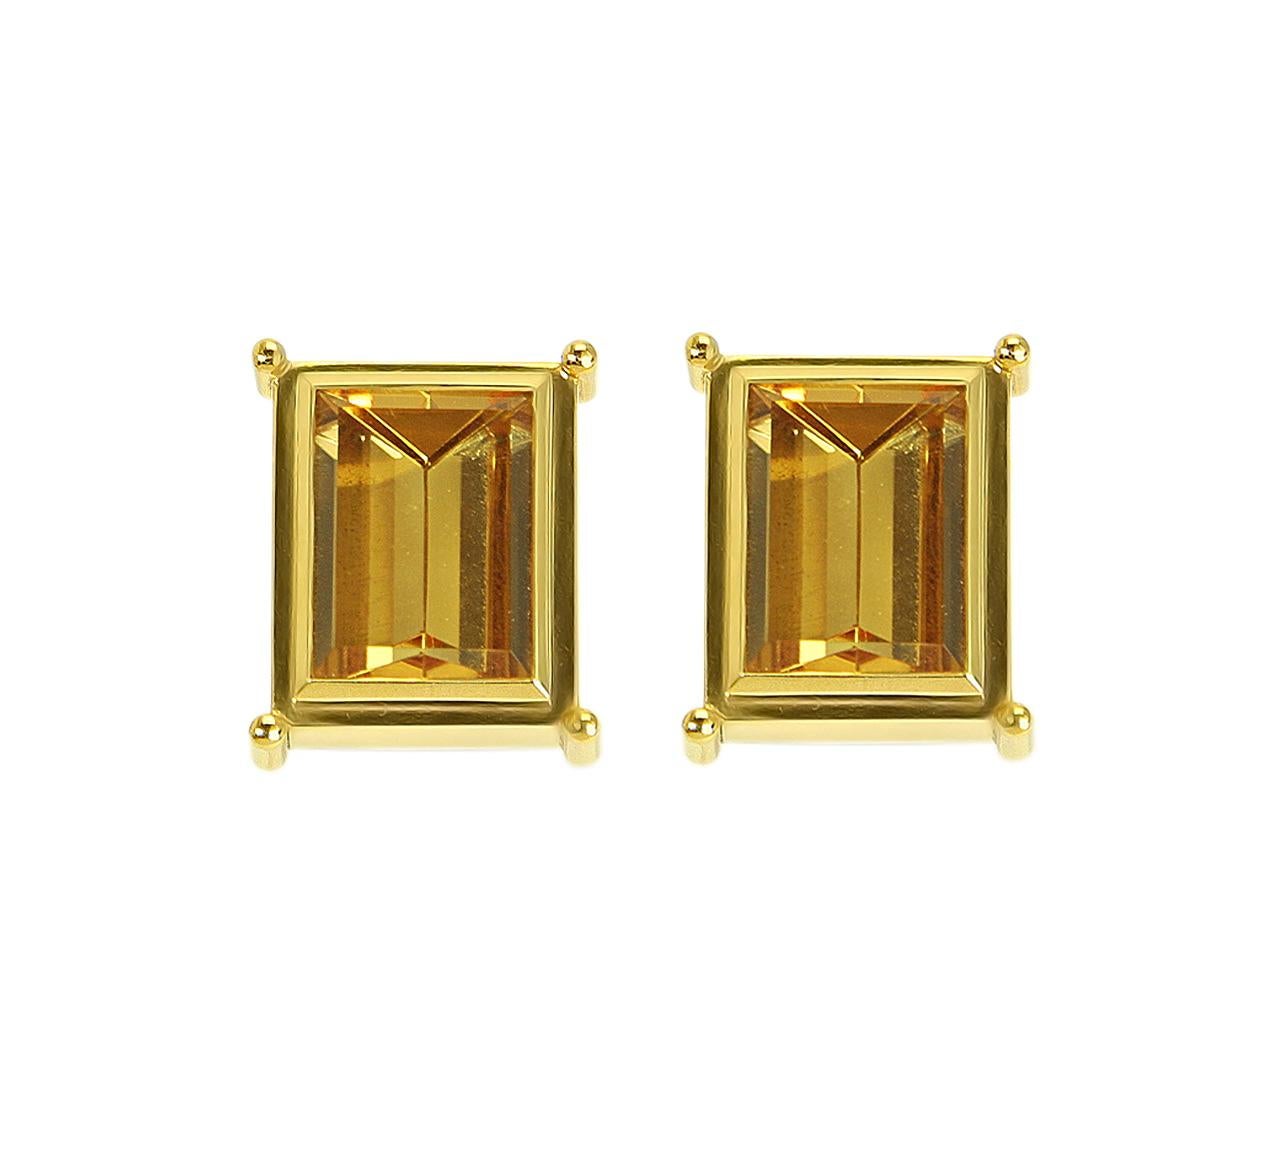 These handmade stud earrings were manufactured in Germany by Colleen B. Rosenblat. 22 karat yellow gold studs with 16.46 carat citrine in excellent quality. 